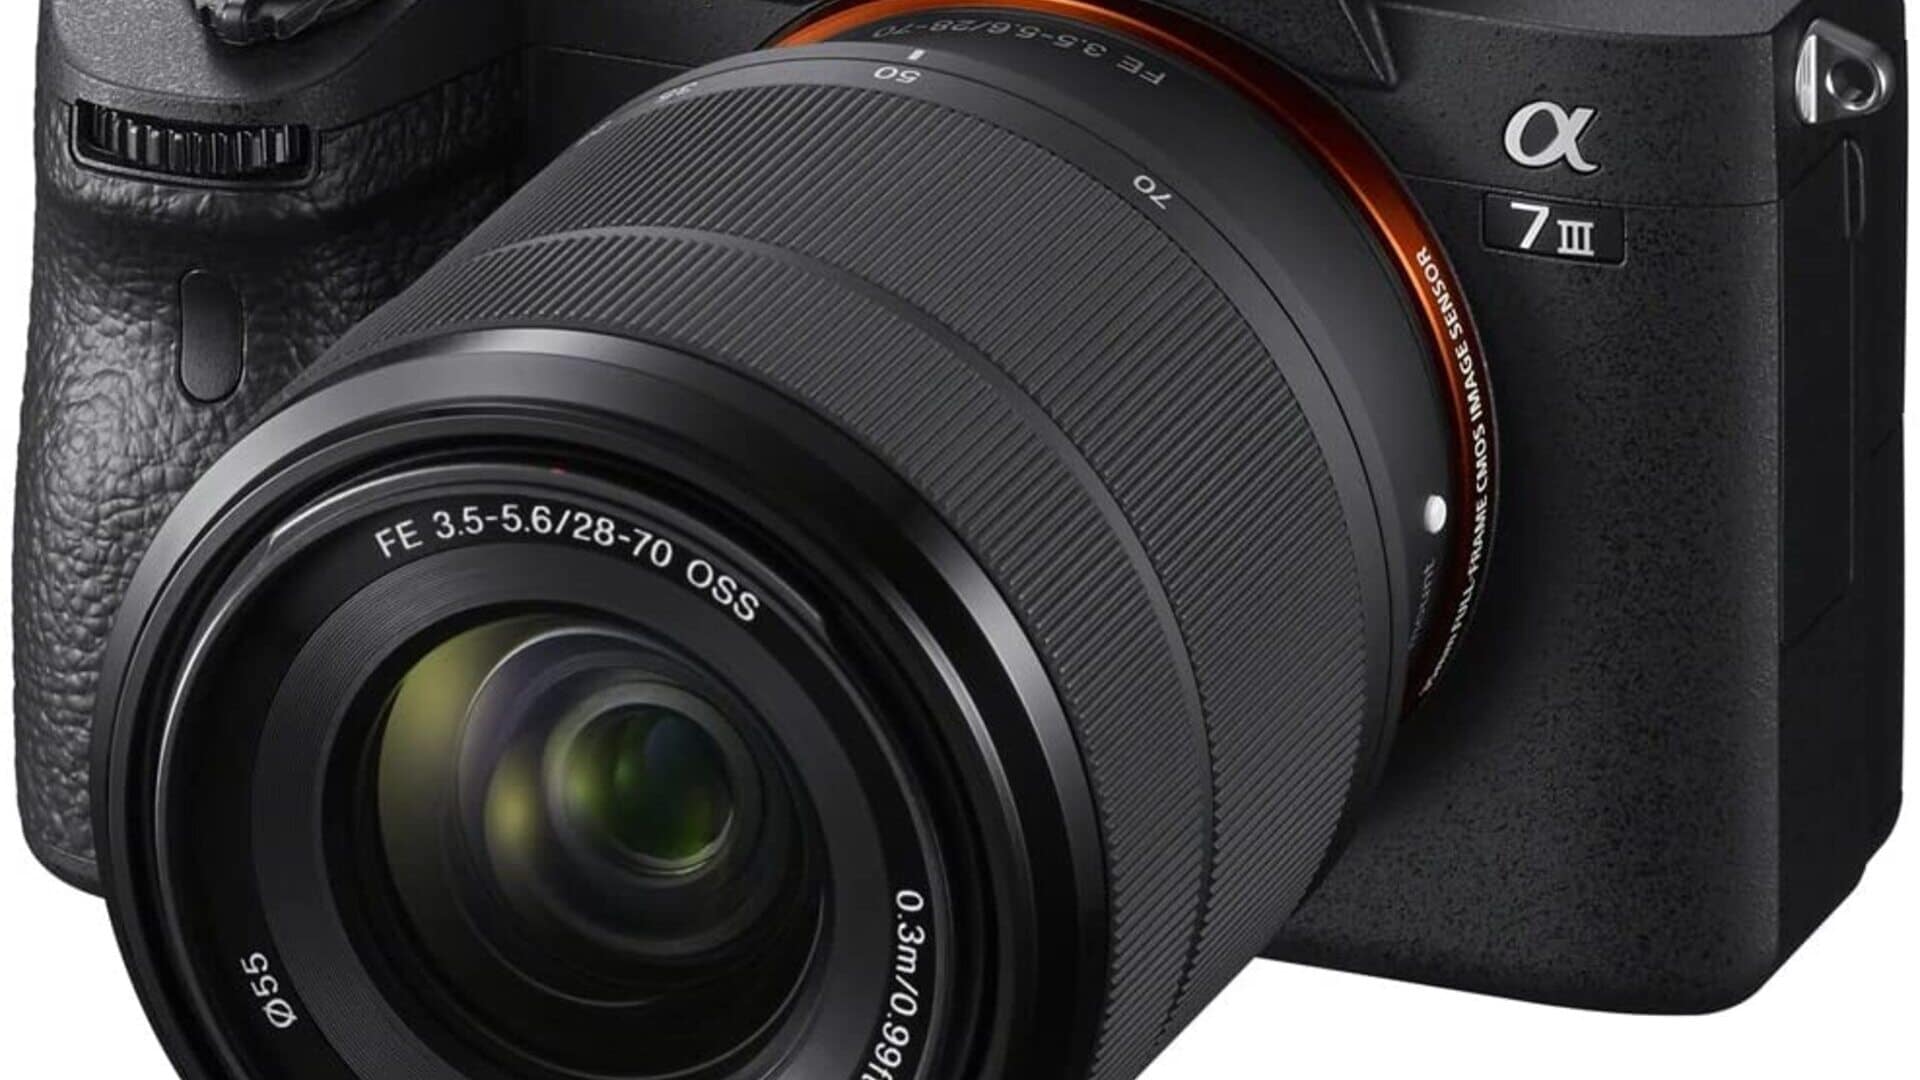 Objectif pour Sony A7 III : quels objectifs choisir ? - Photovore